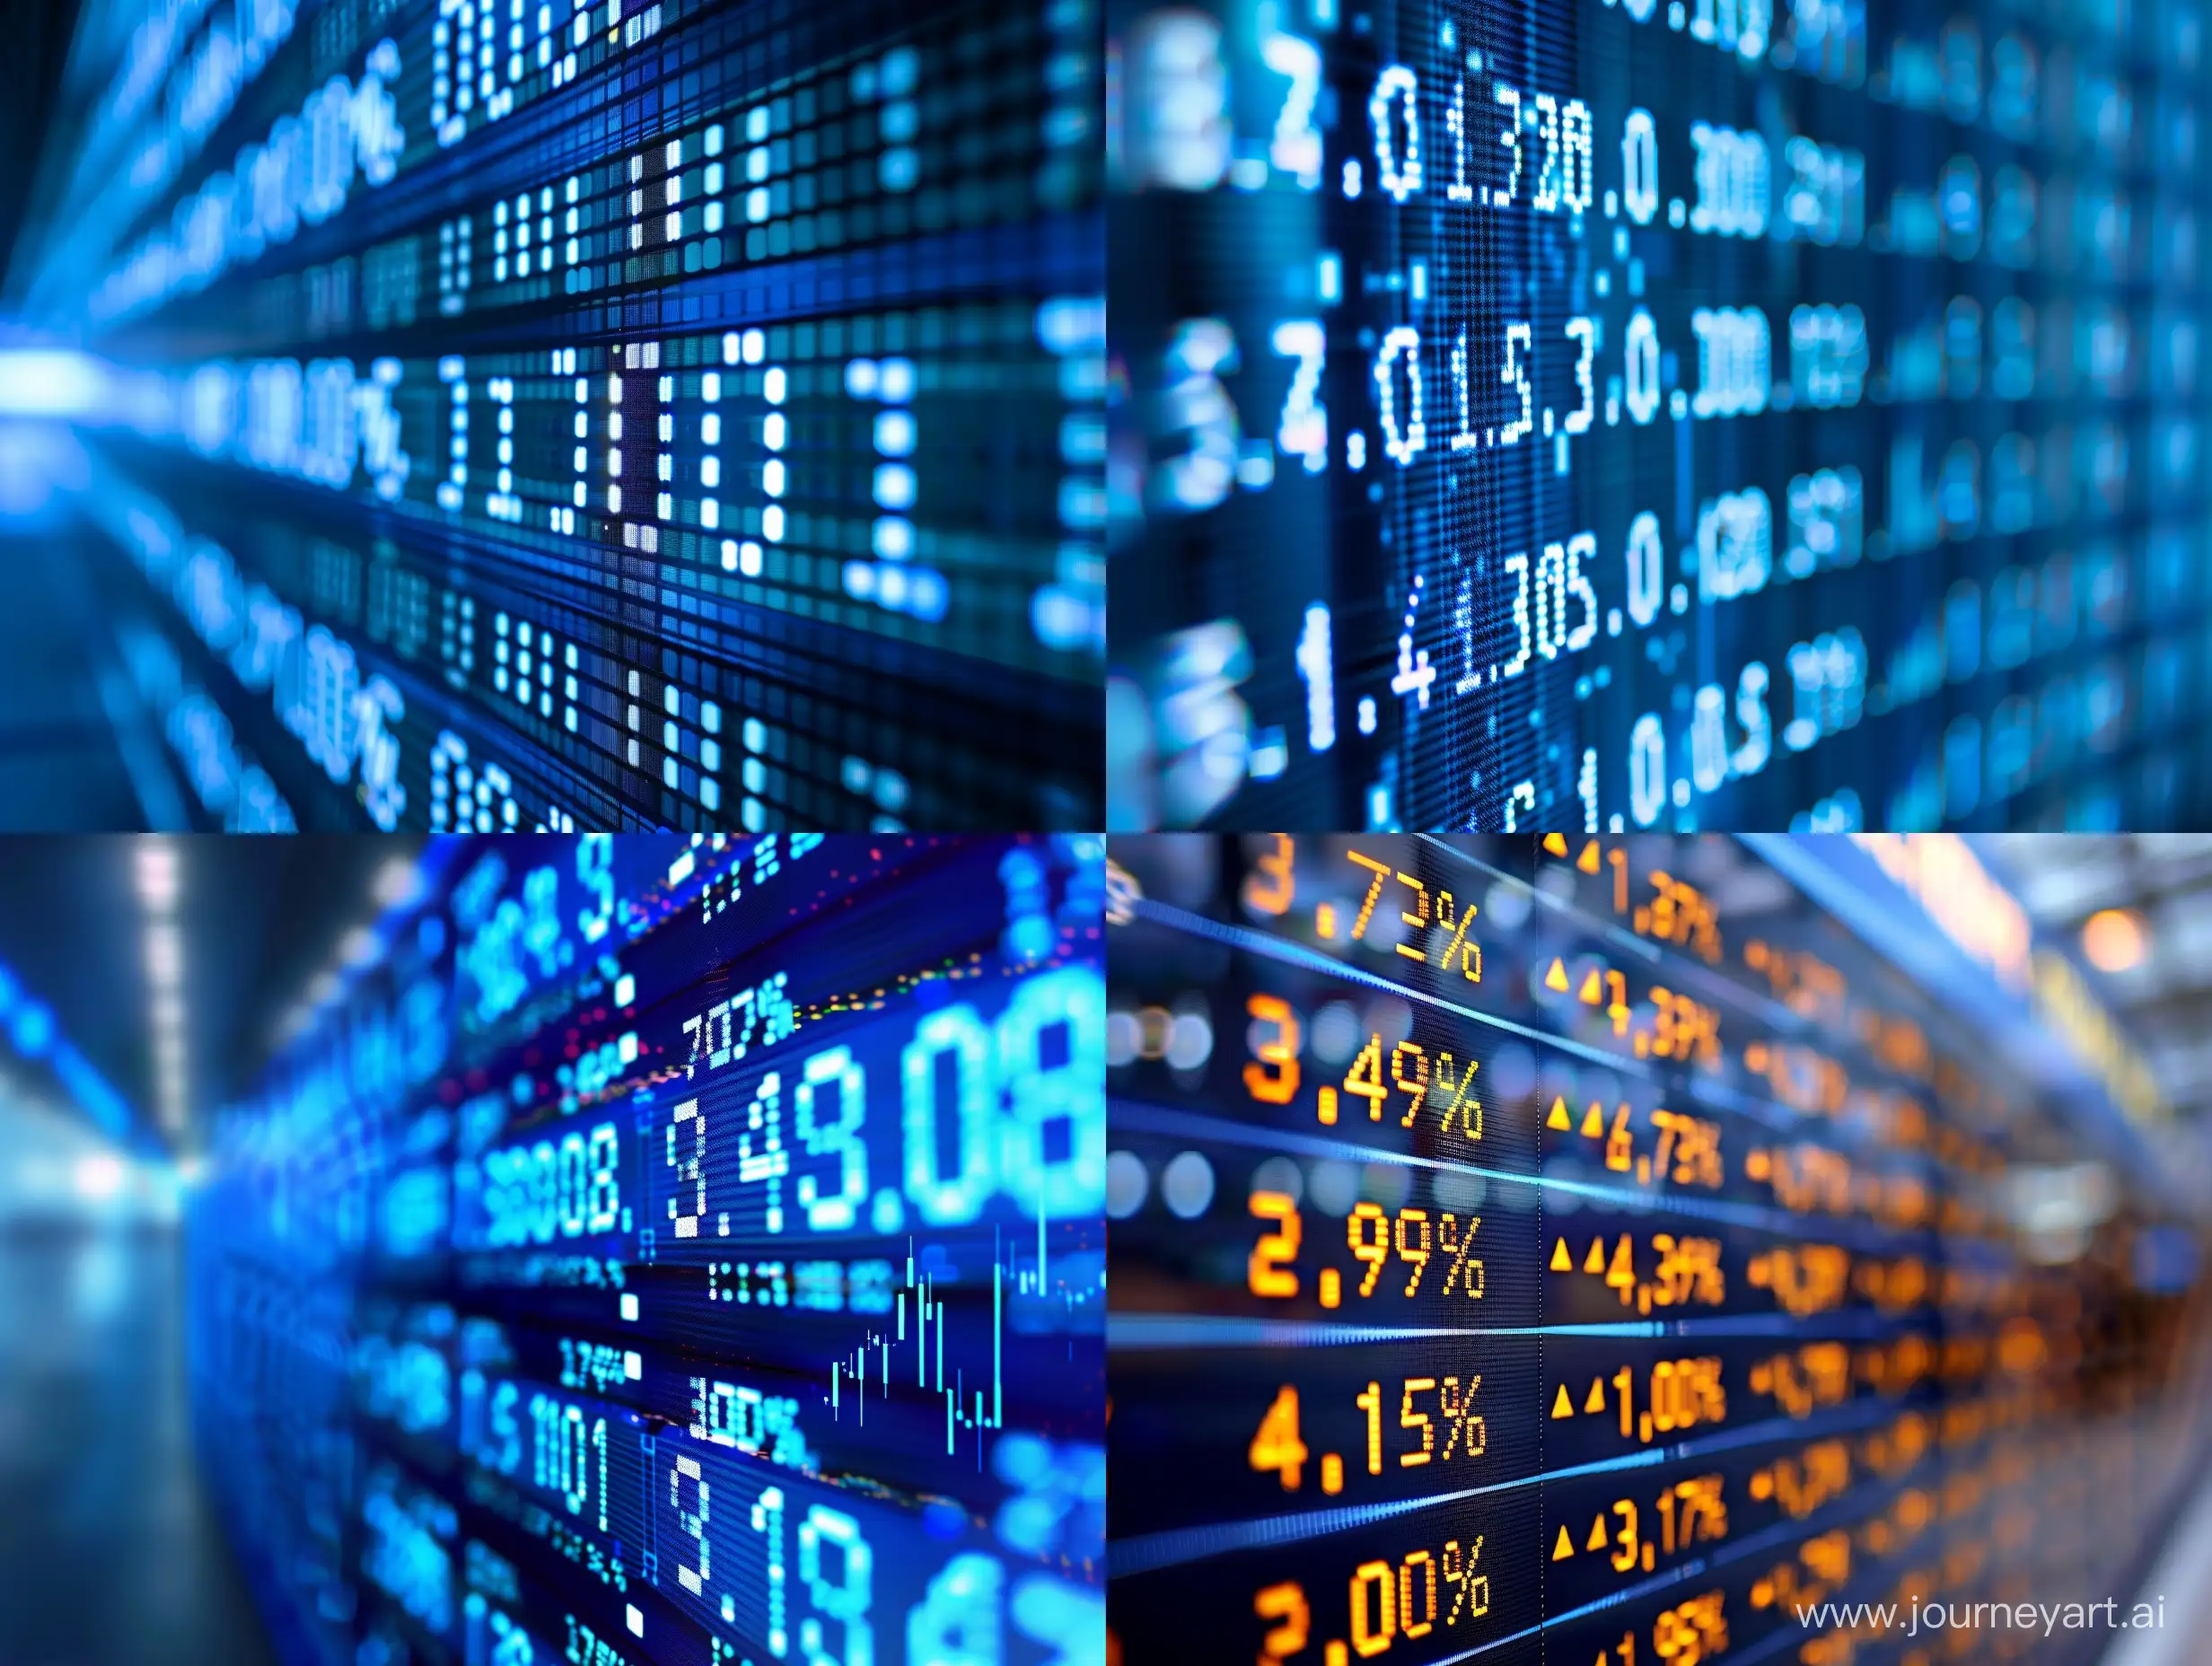 Stock market board-numbers-blue color-stock market